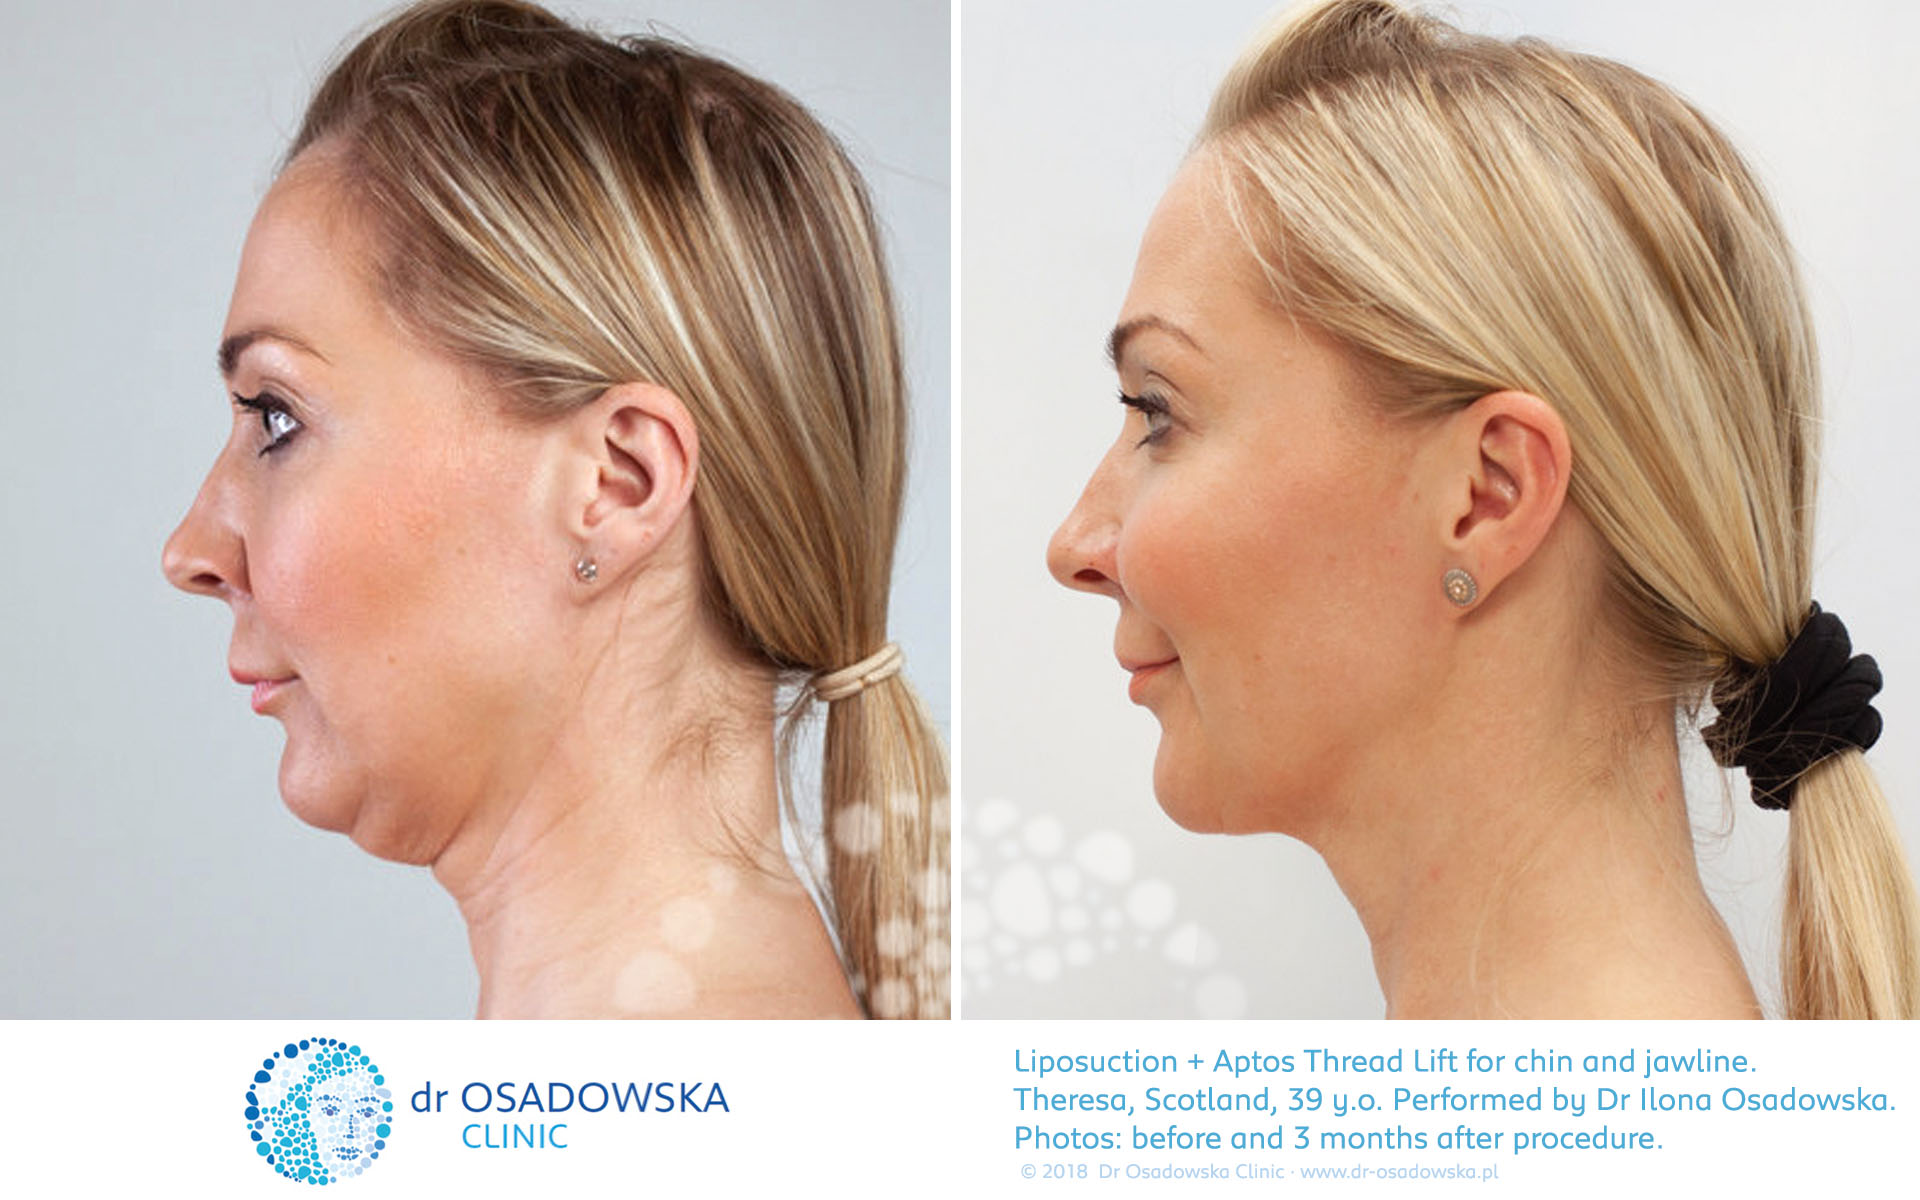 Liposuction for chin and jawls, then Thread Lift Aptos for neck and cheeks. Pictures before and 3 months after. Theresa, a a 39 year old from Scotland. (A)